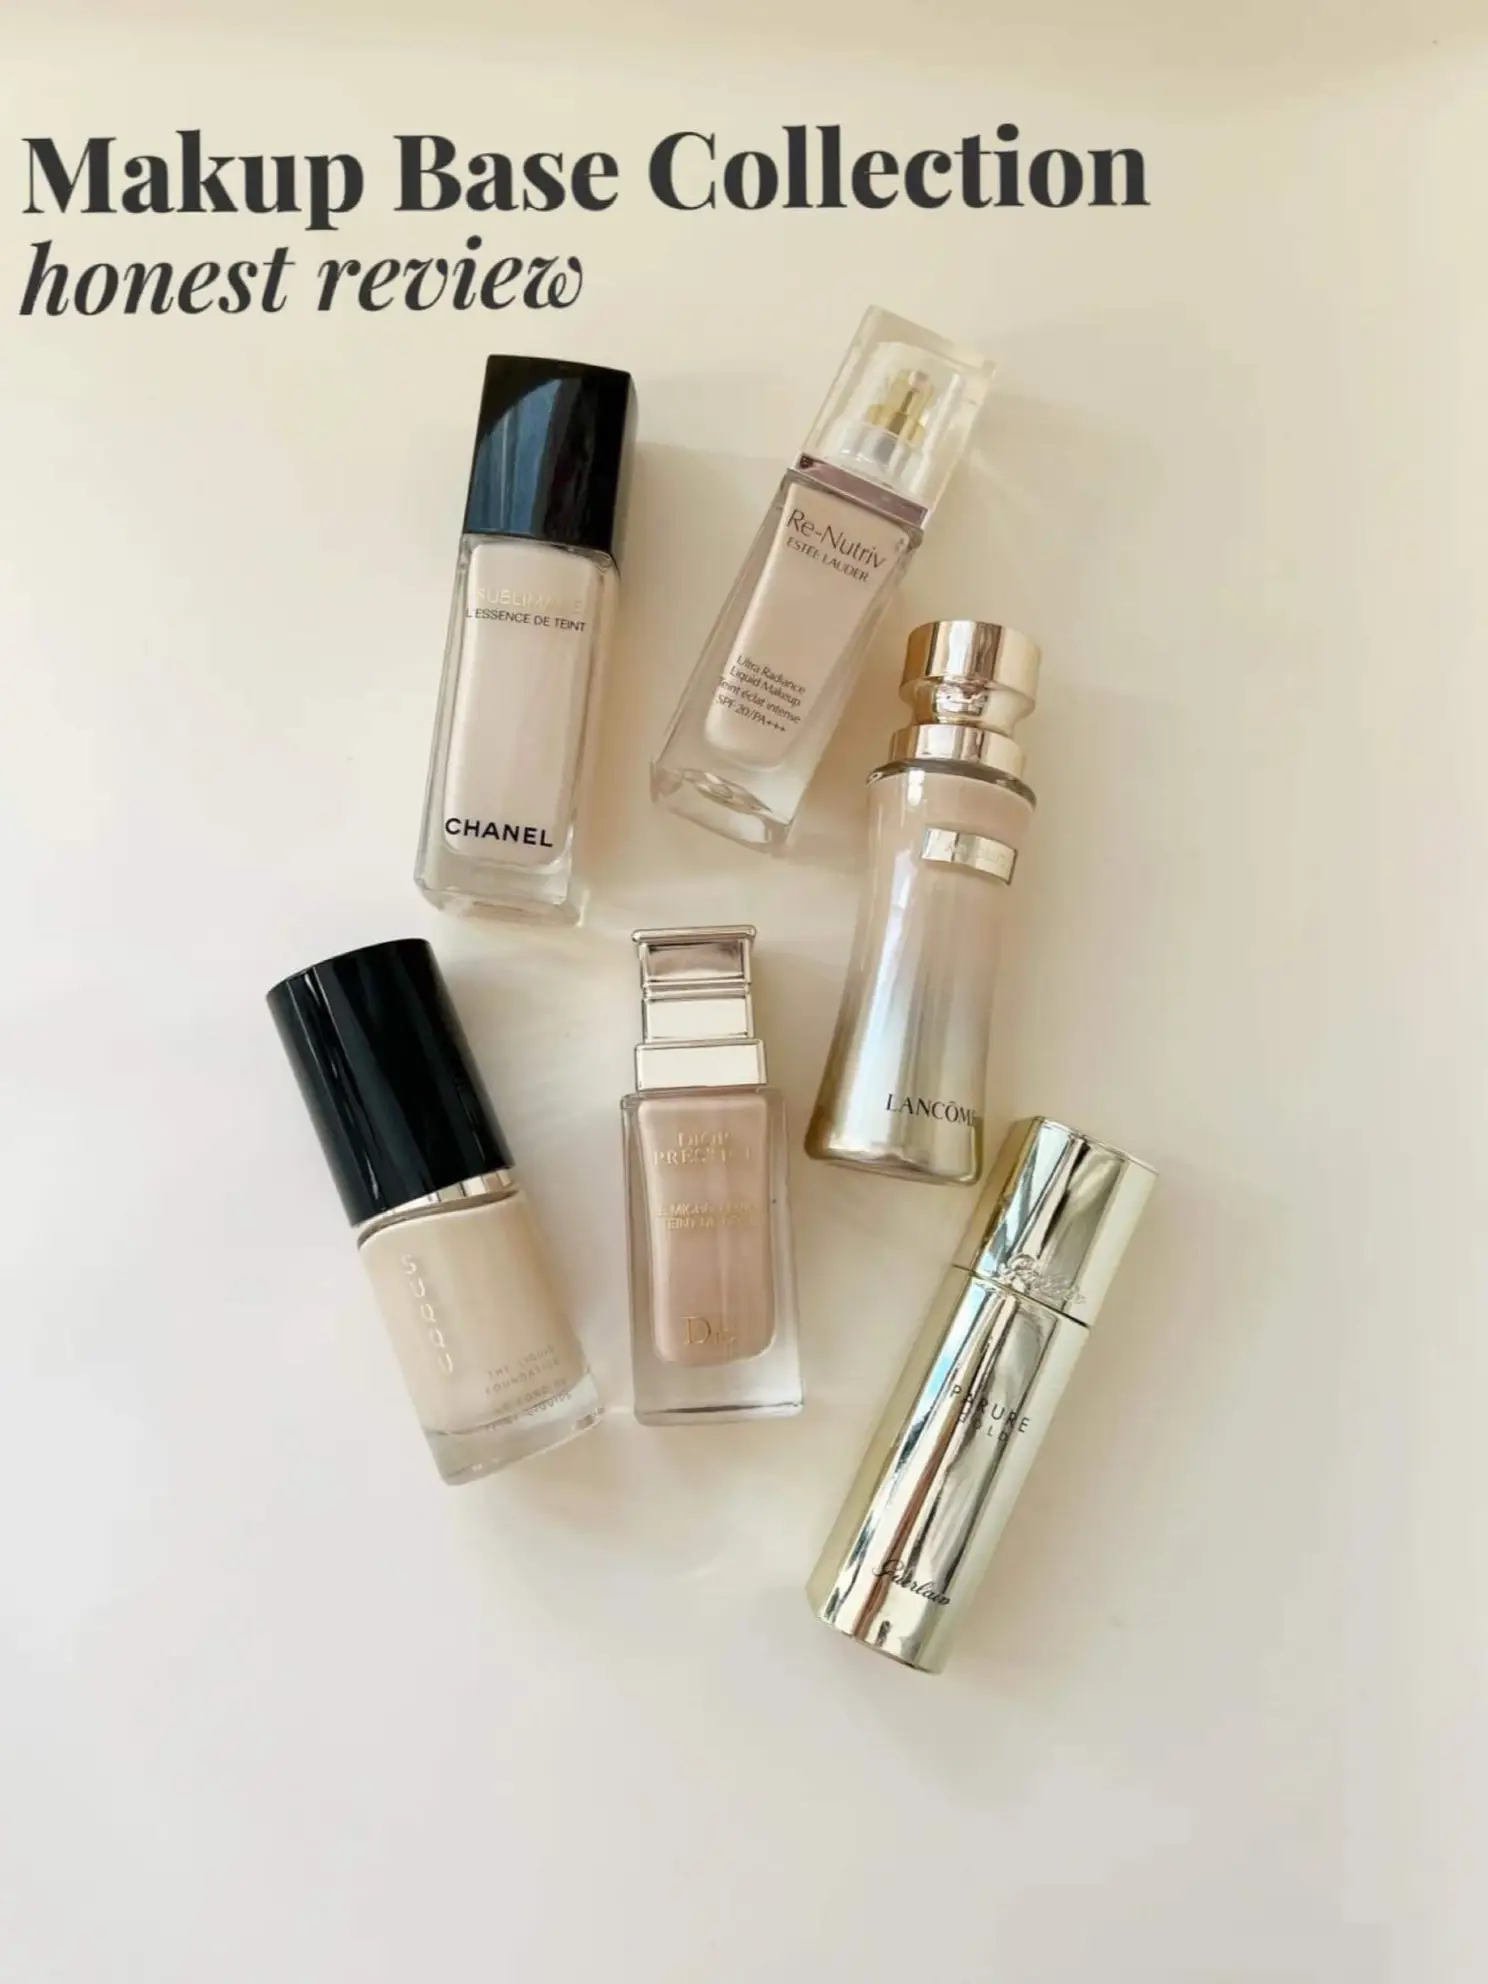 Makeup Base Collection honest review, Gallery posted by olivia.xx